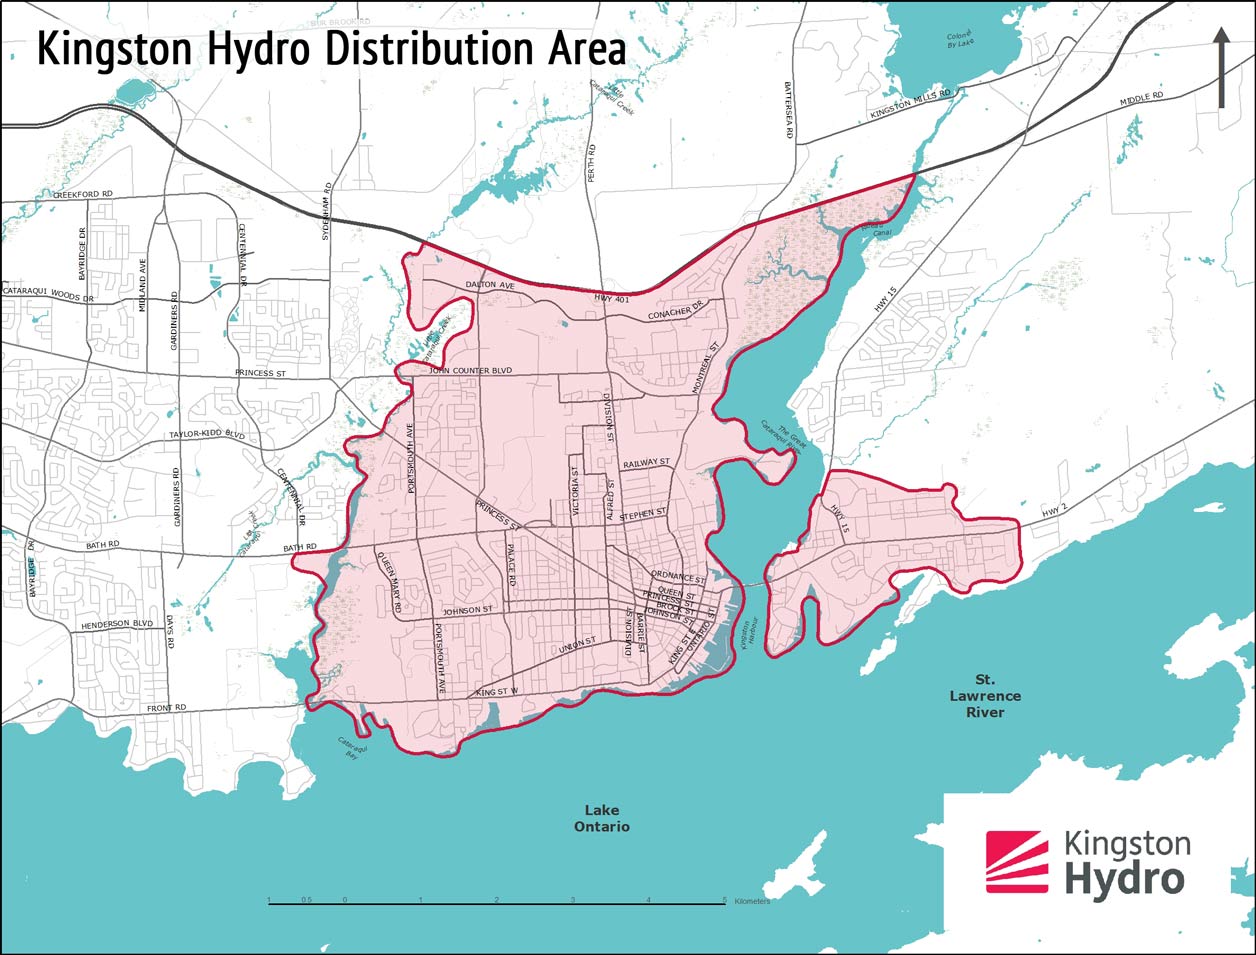 map of the Kingston Hydro distribution area